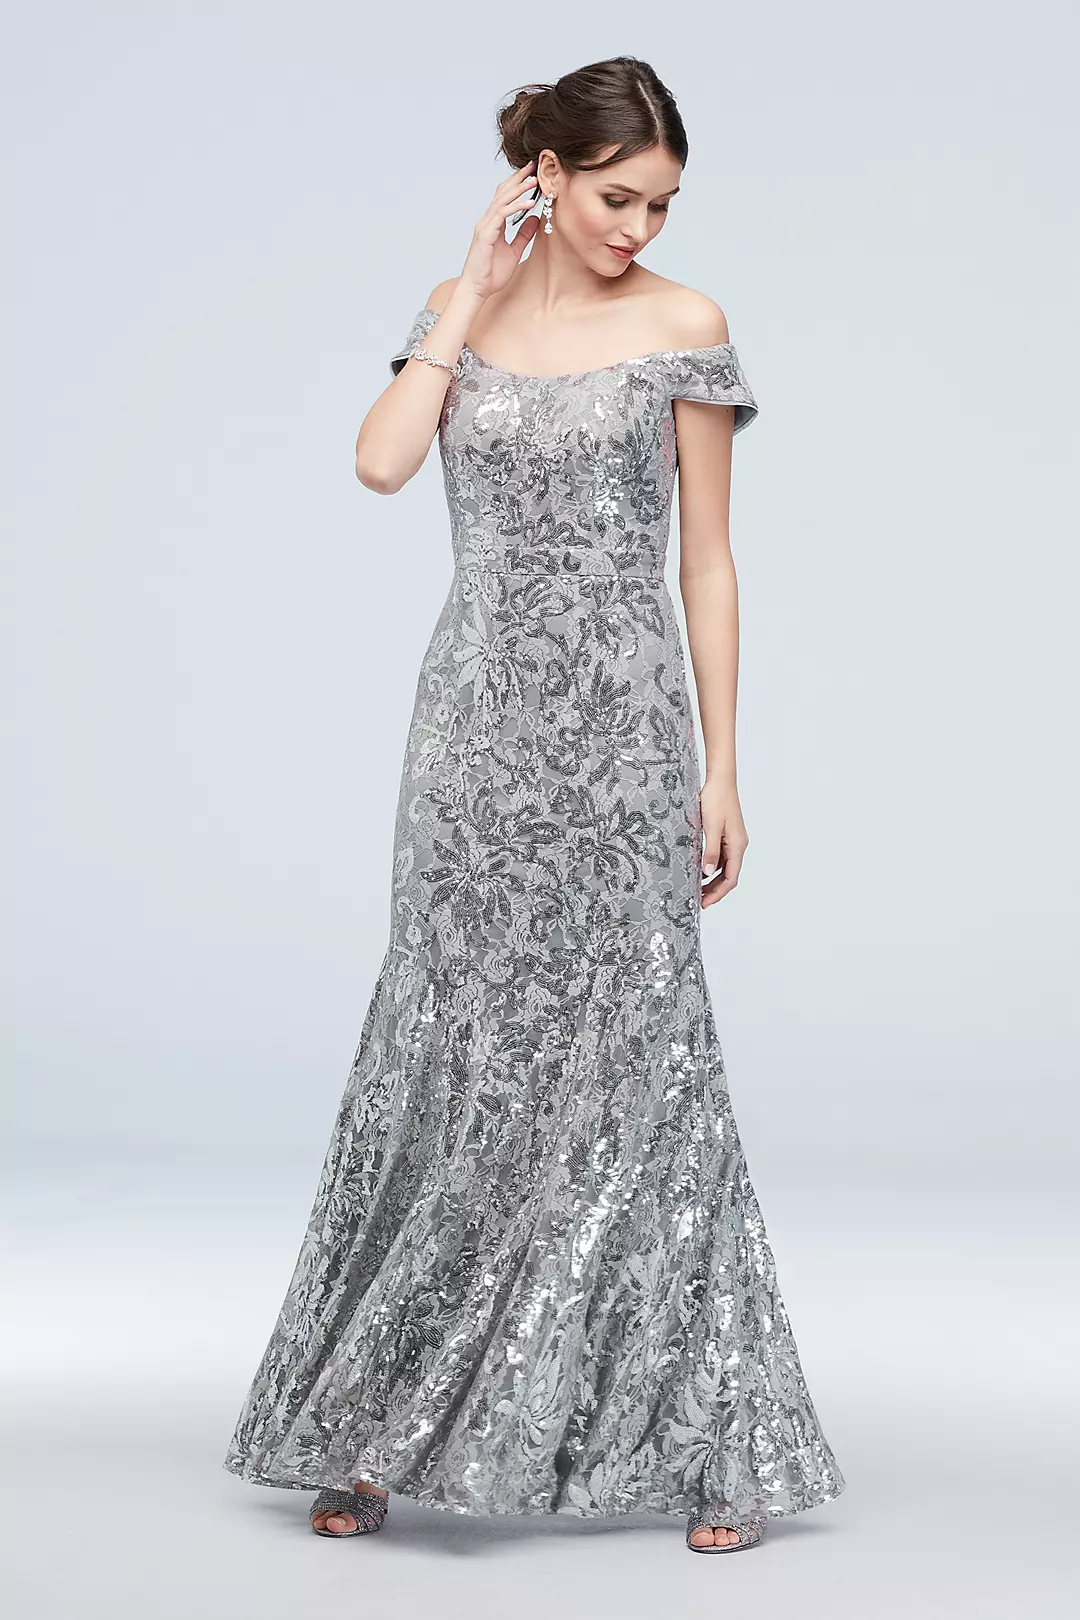 Sequin Lace Off-the-Shoulder Mermaid Gown | David's Bridal